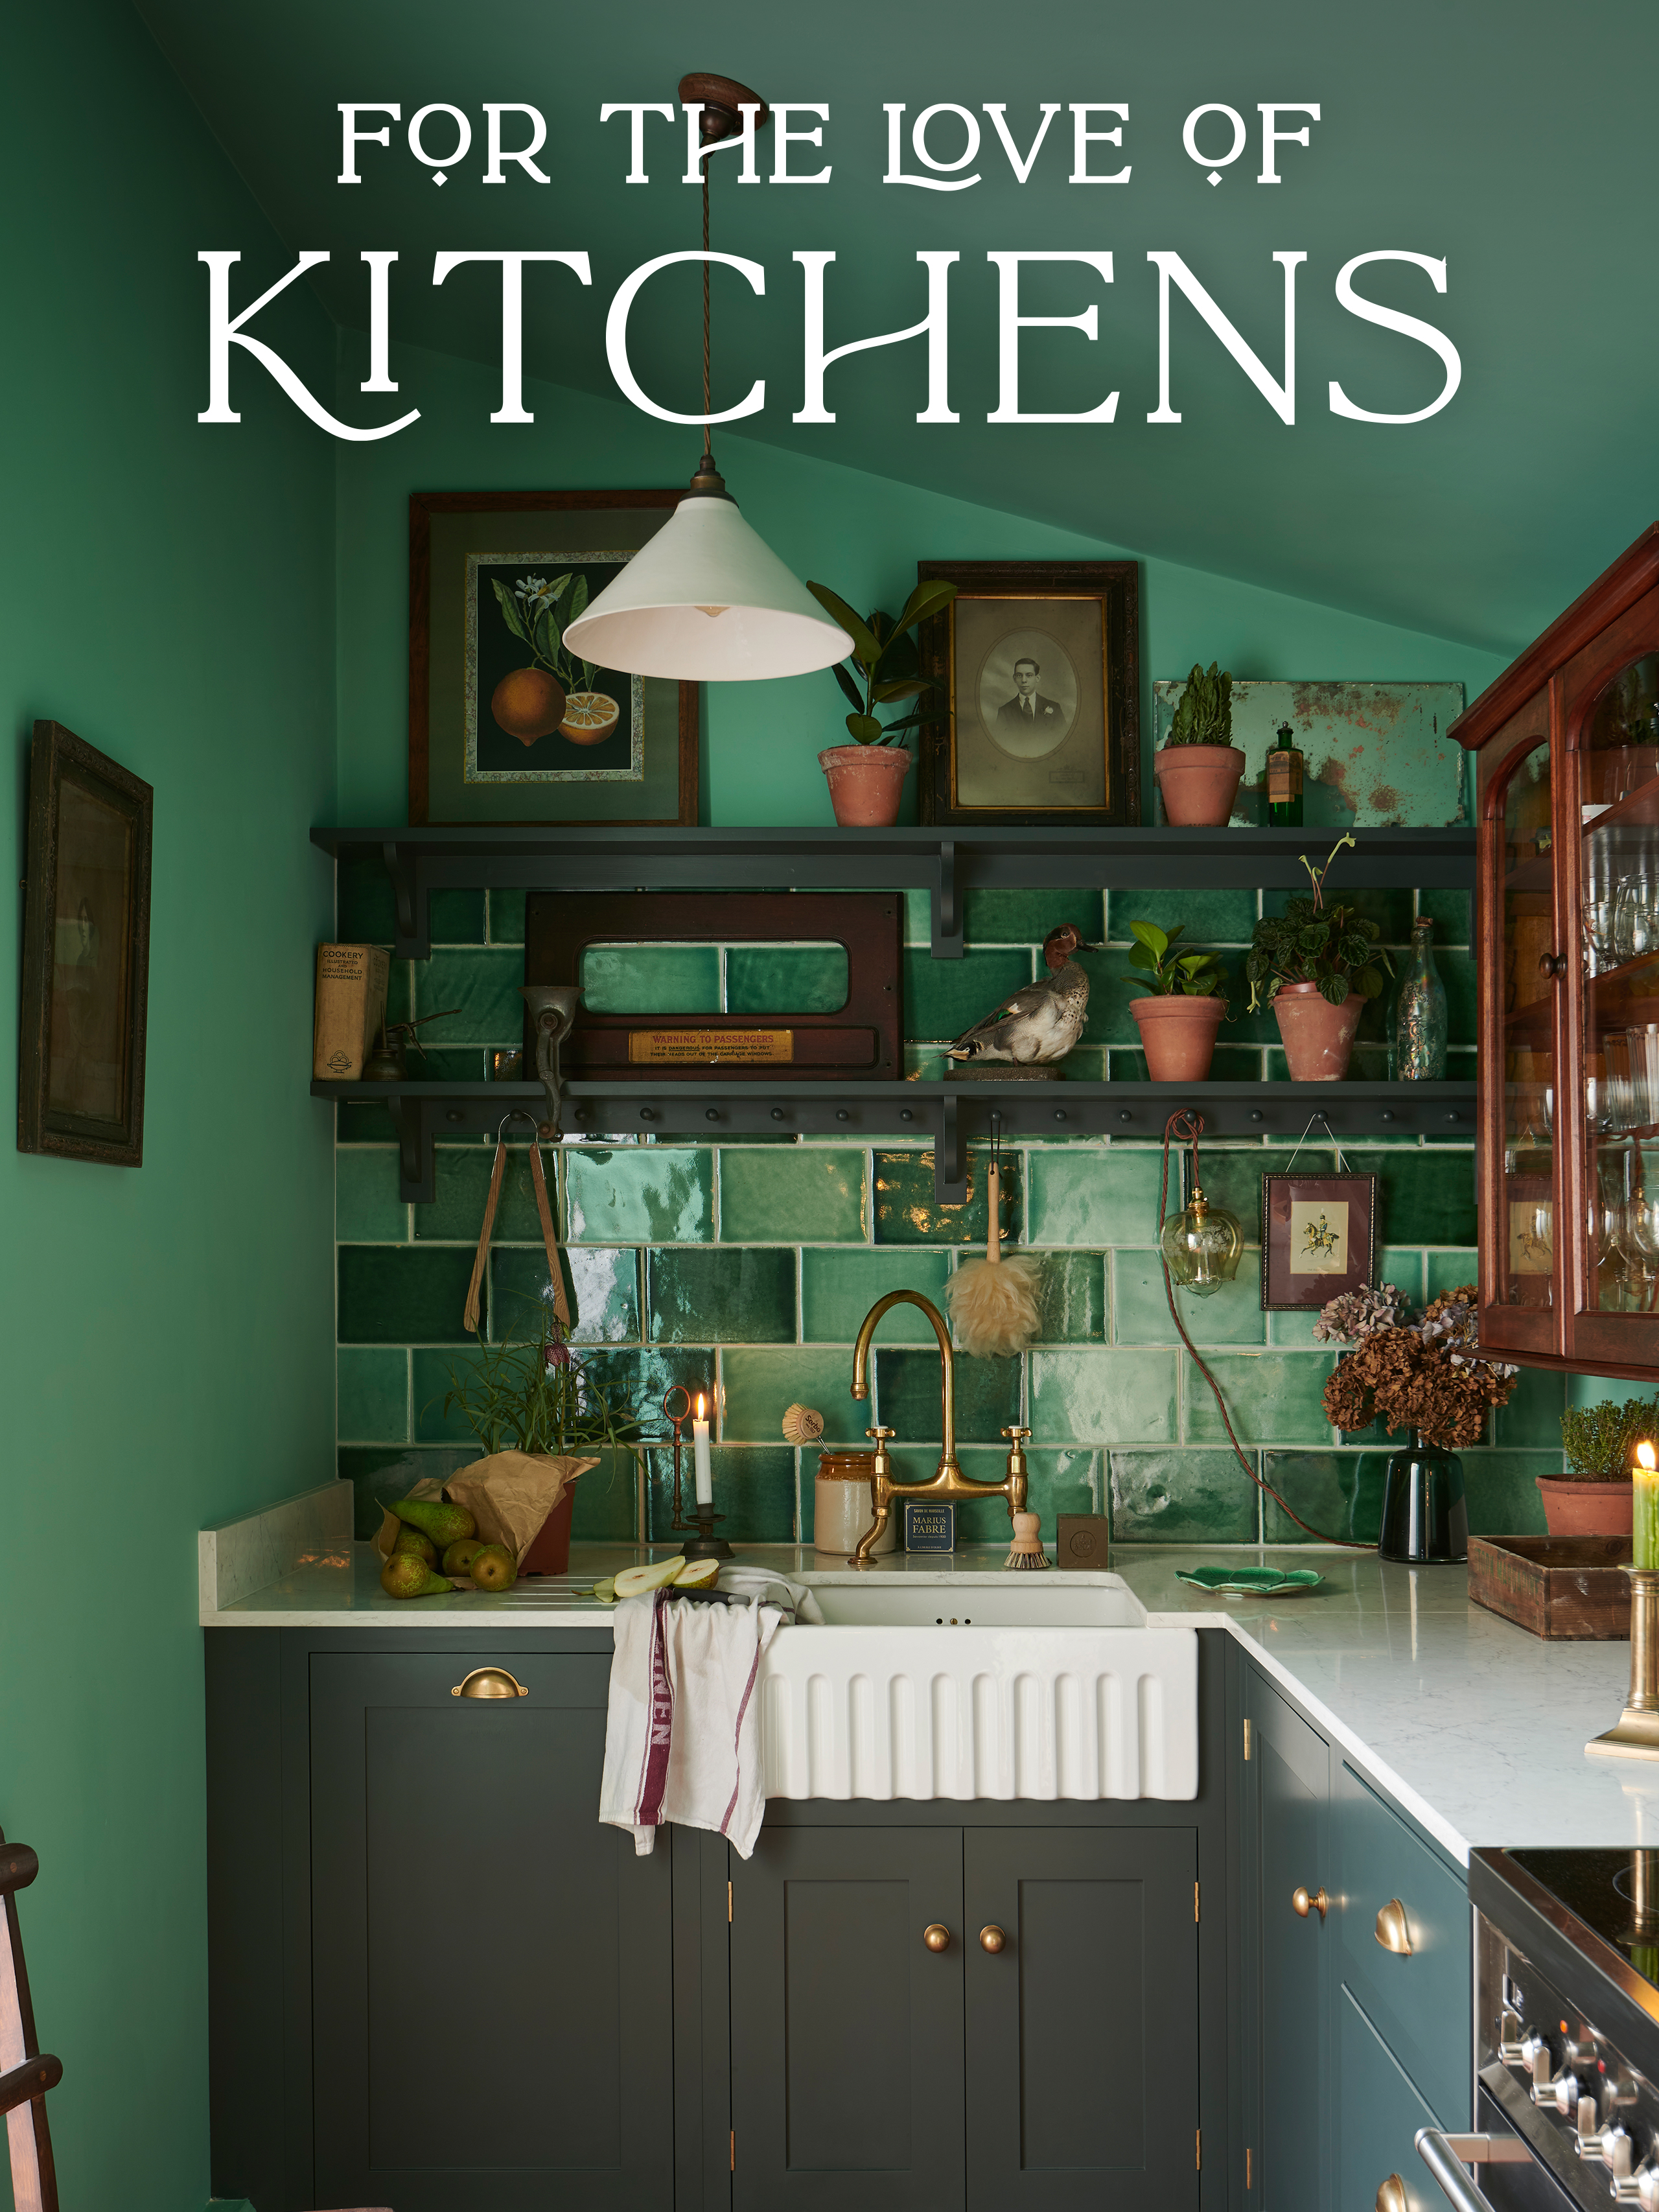 For The Love of Kitchens Season 1 Episode 1